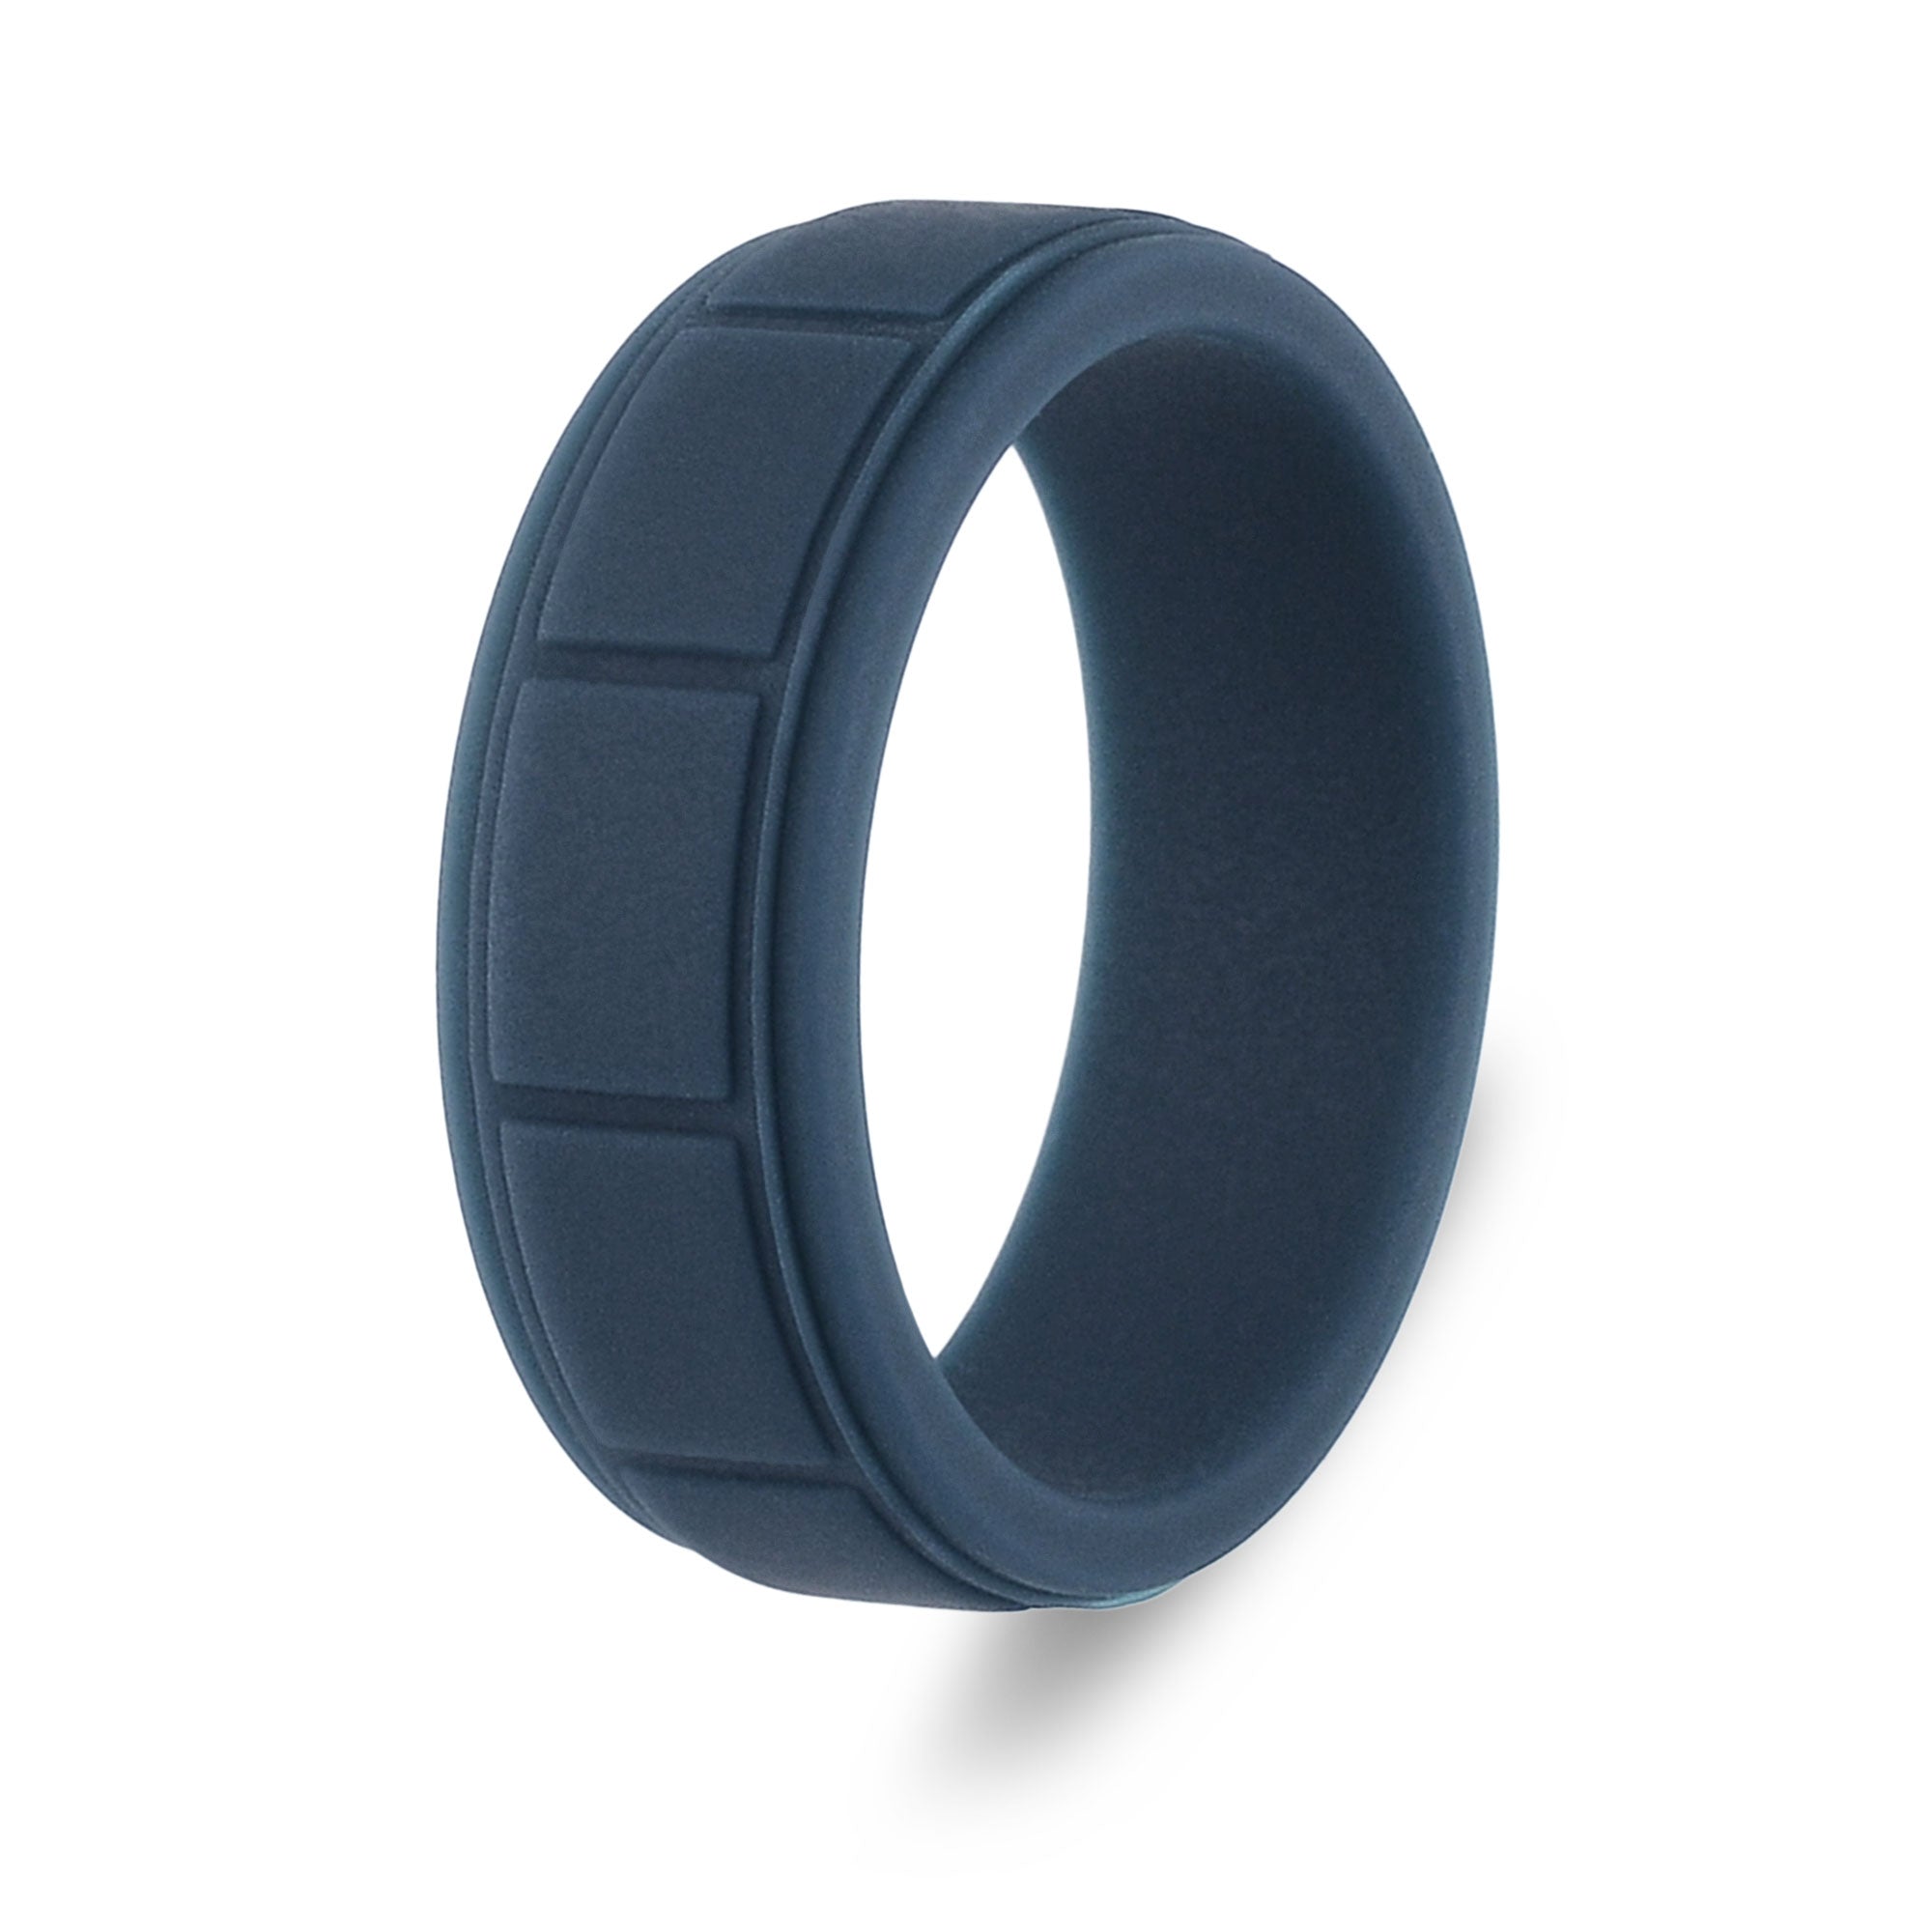 The Denim - Silicone Ring